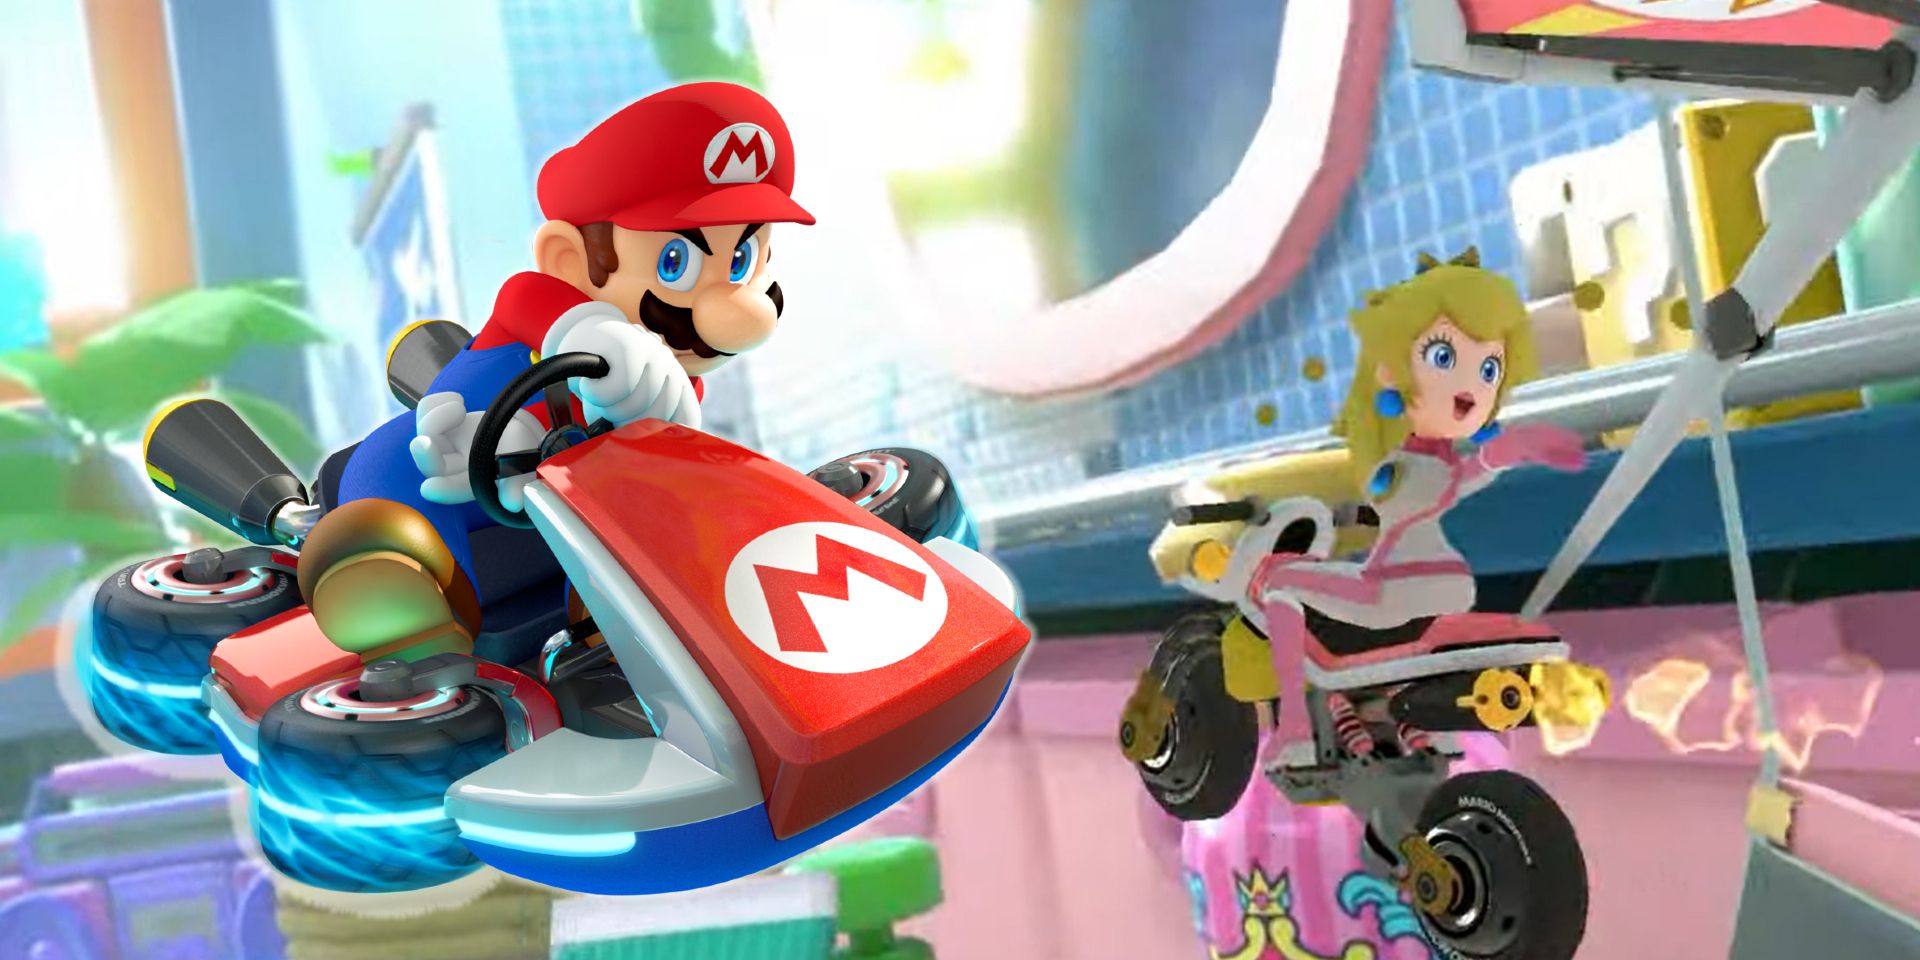 An image of Princess Peach doing a jump on Mario Kart 8's new Squeaky Clean Sprint course, superimposed with an image of Mario drifting.